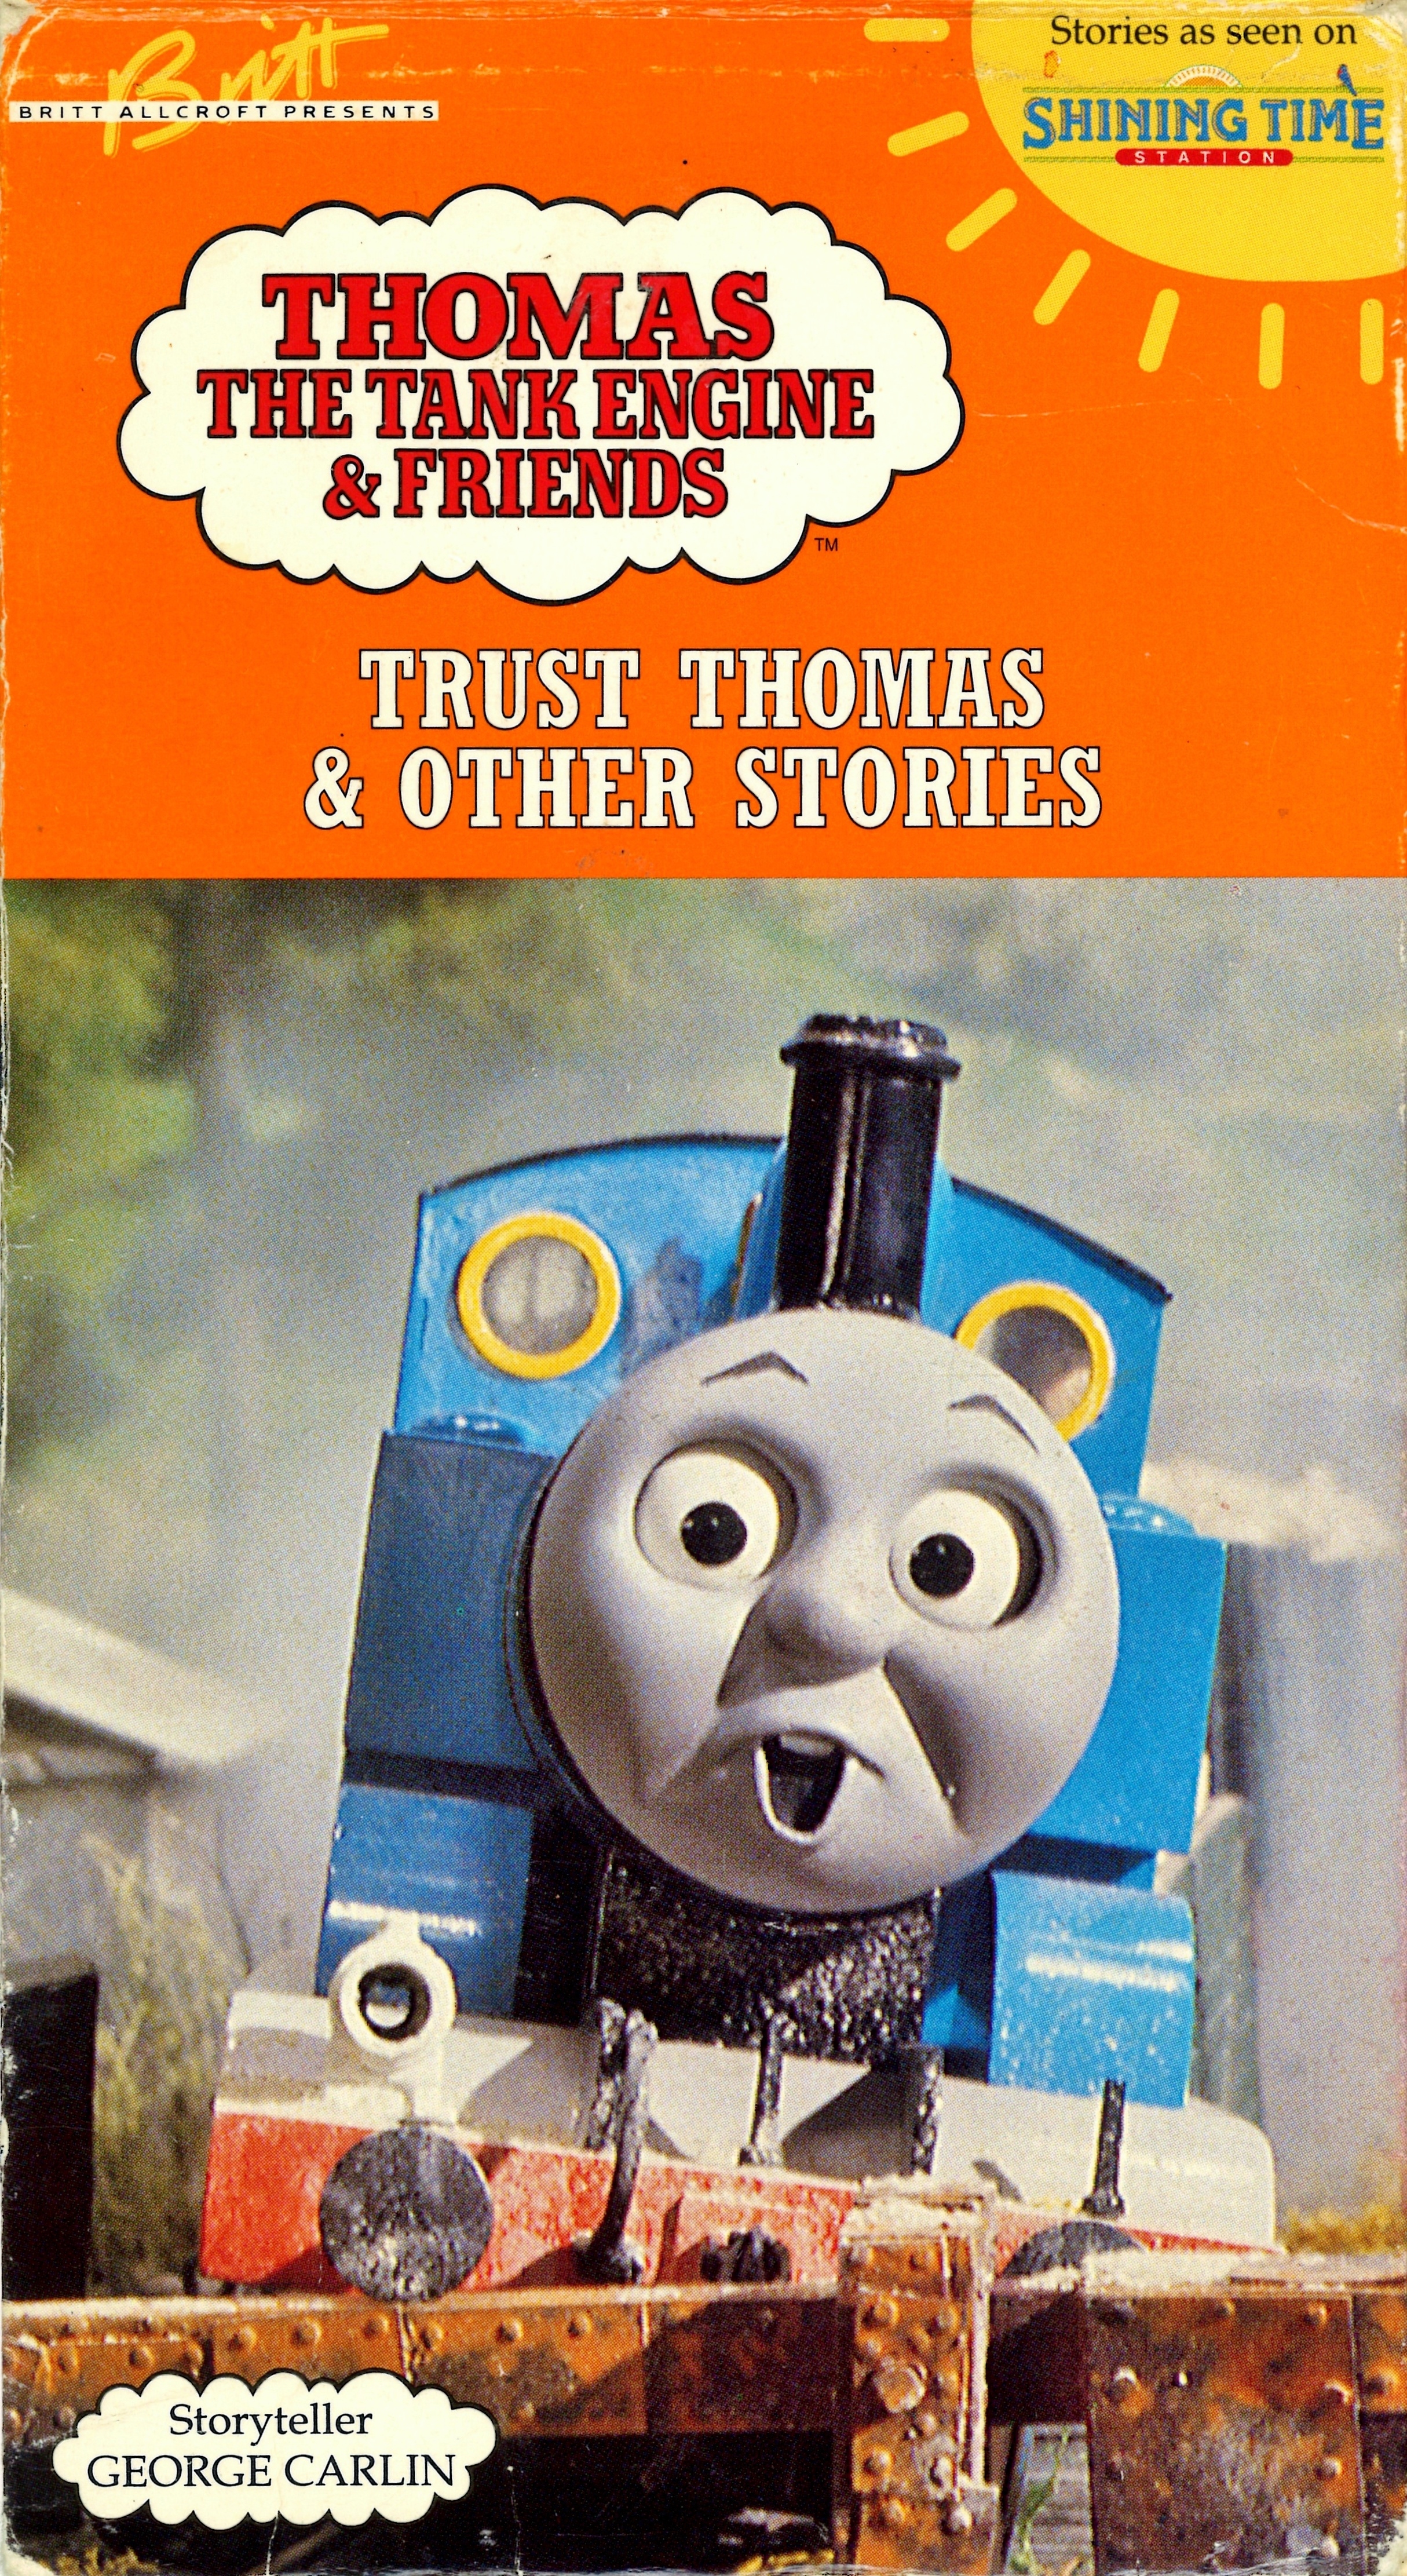 Trust Thomas and Other Stories | Thomas the Tank Engine Wiki | Fandom